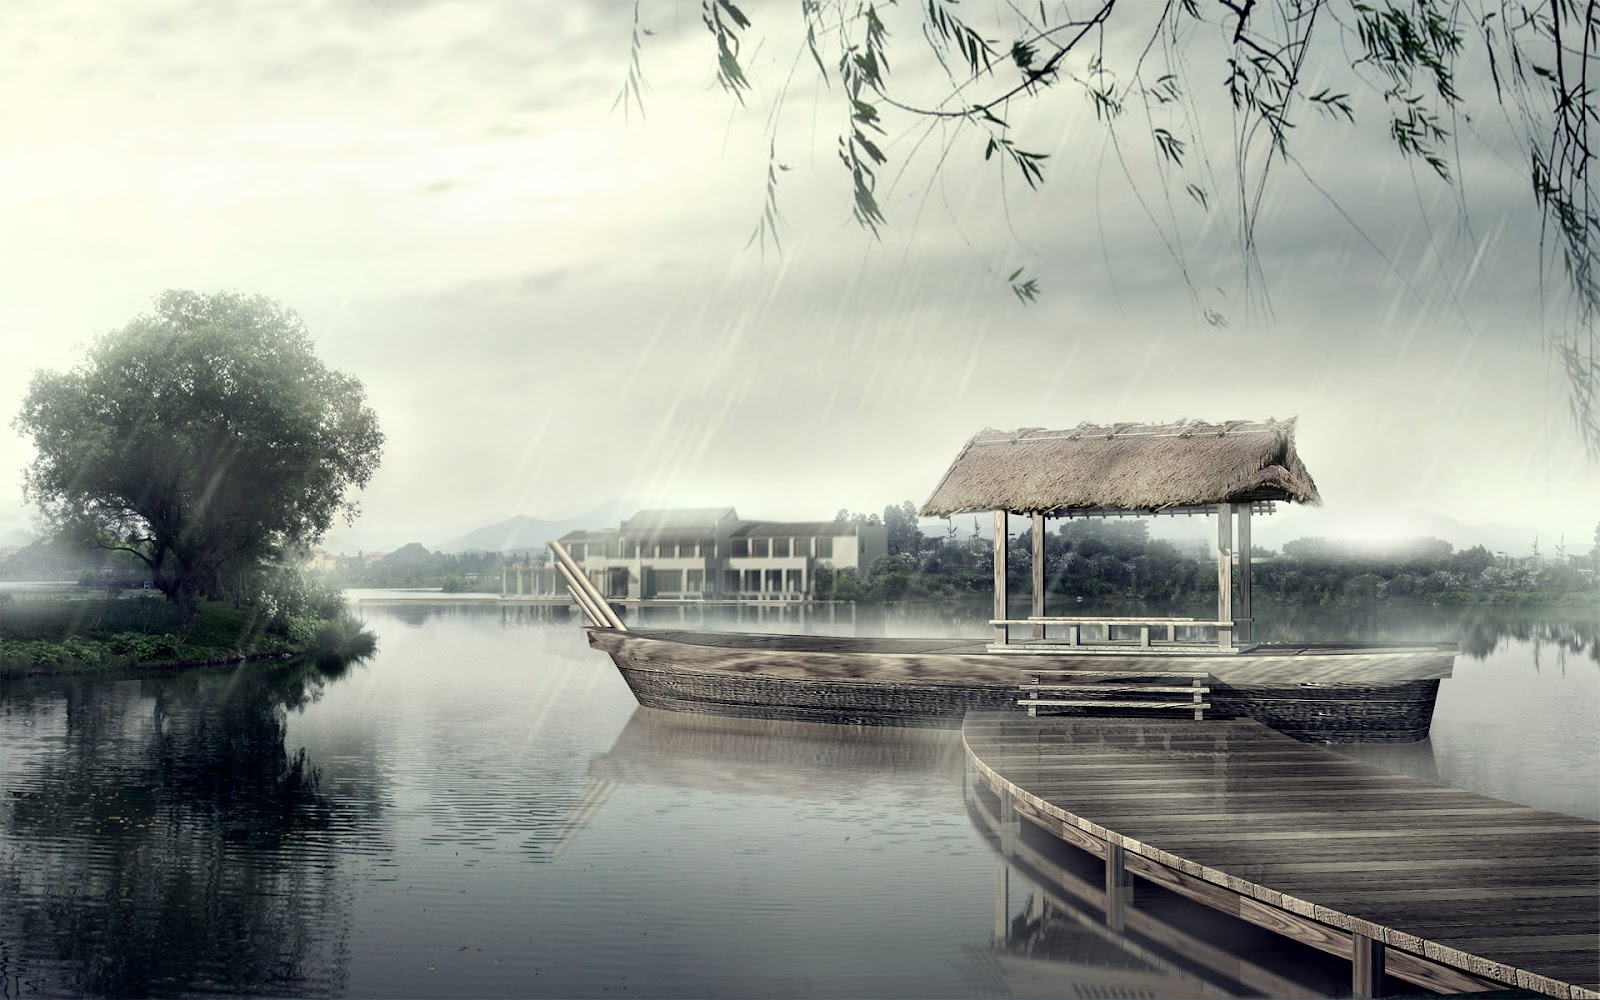 http://1.bp.blogspot.com/-bSvlYoys93E/T6xpVHgw-DI/AAAAAAAANiU/hS5wNE6haOg/s1600/lake+bote+house+woodbote+small+simple+travel+new+xp+wallpapers+windows7windows8+xp7+pc+them+mobile+themes+pc+background+walls+mobile+background+walls+free+download.jpg